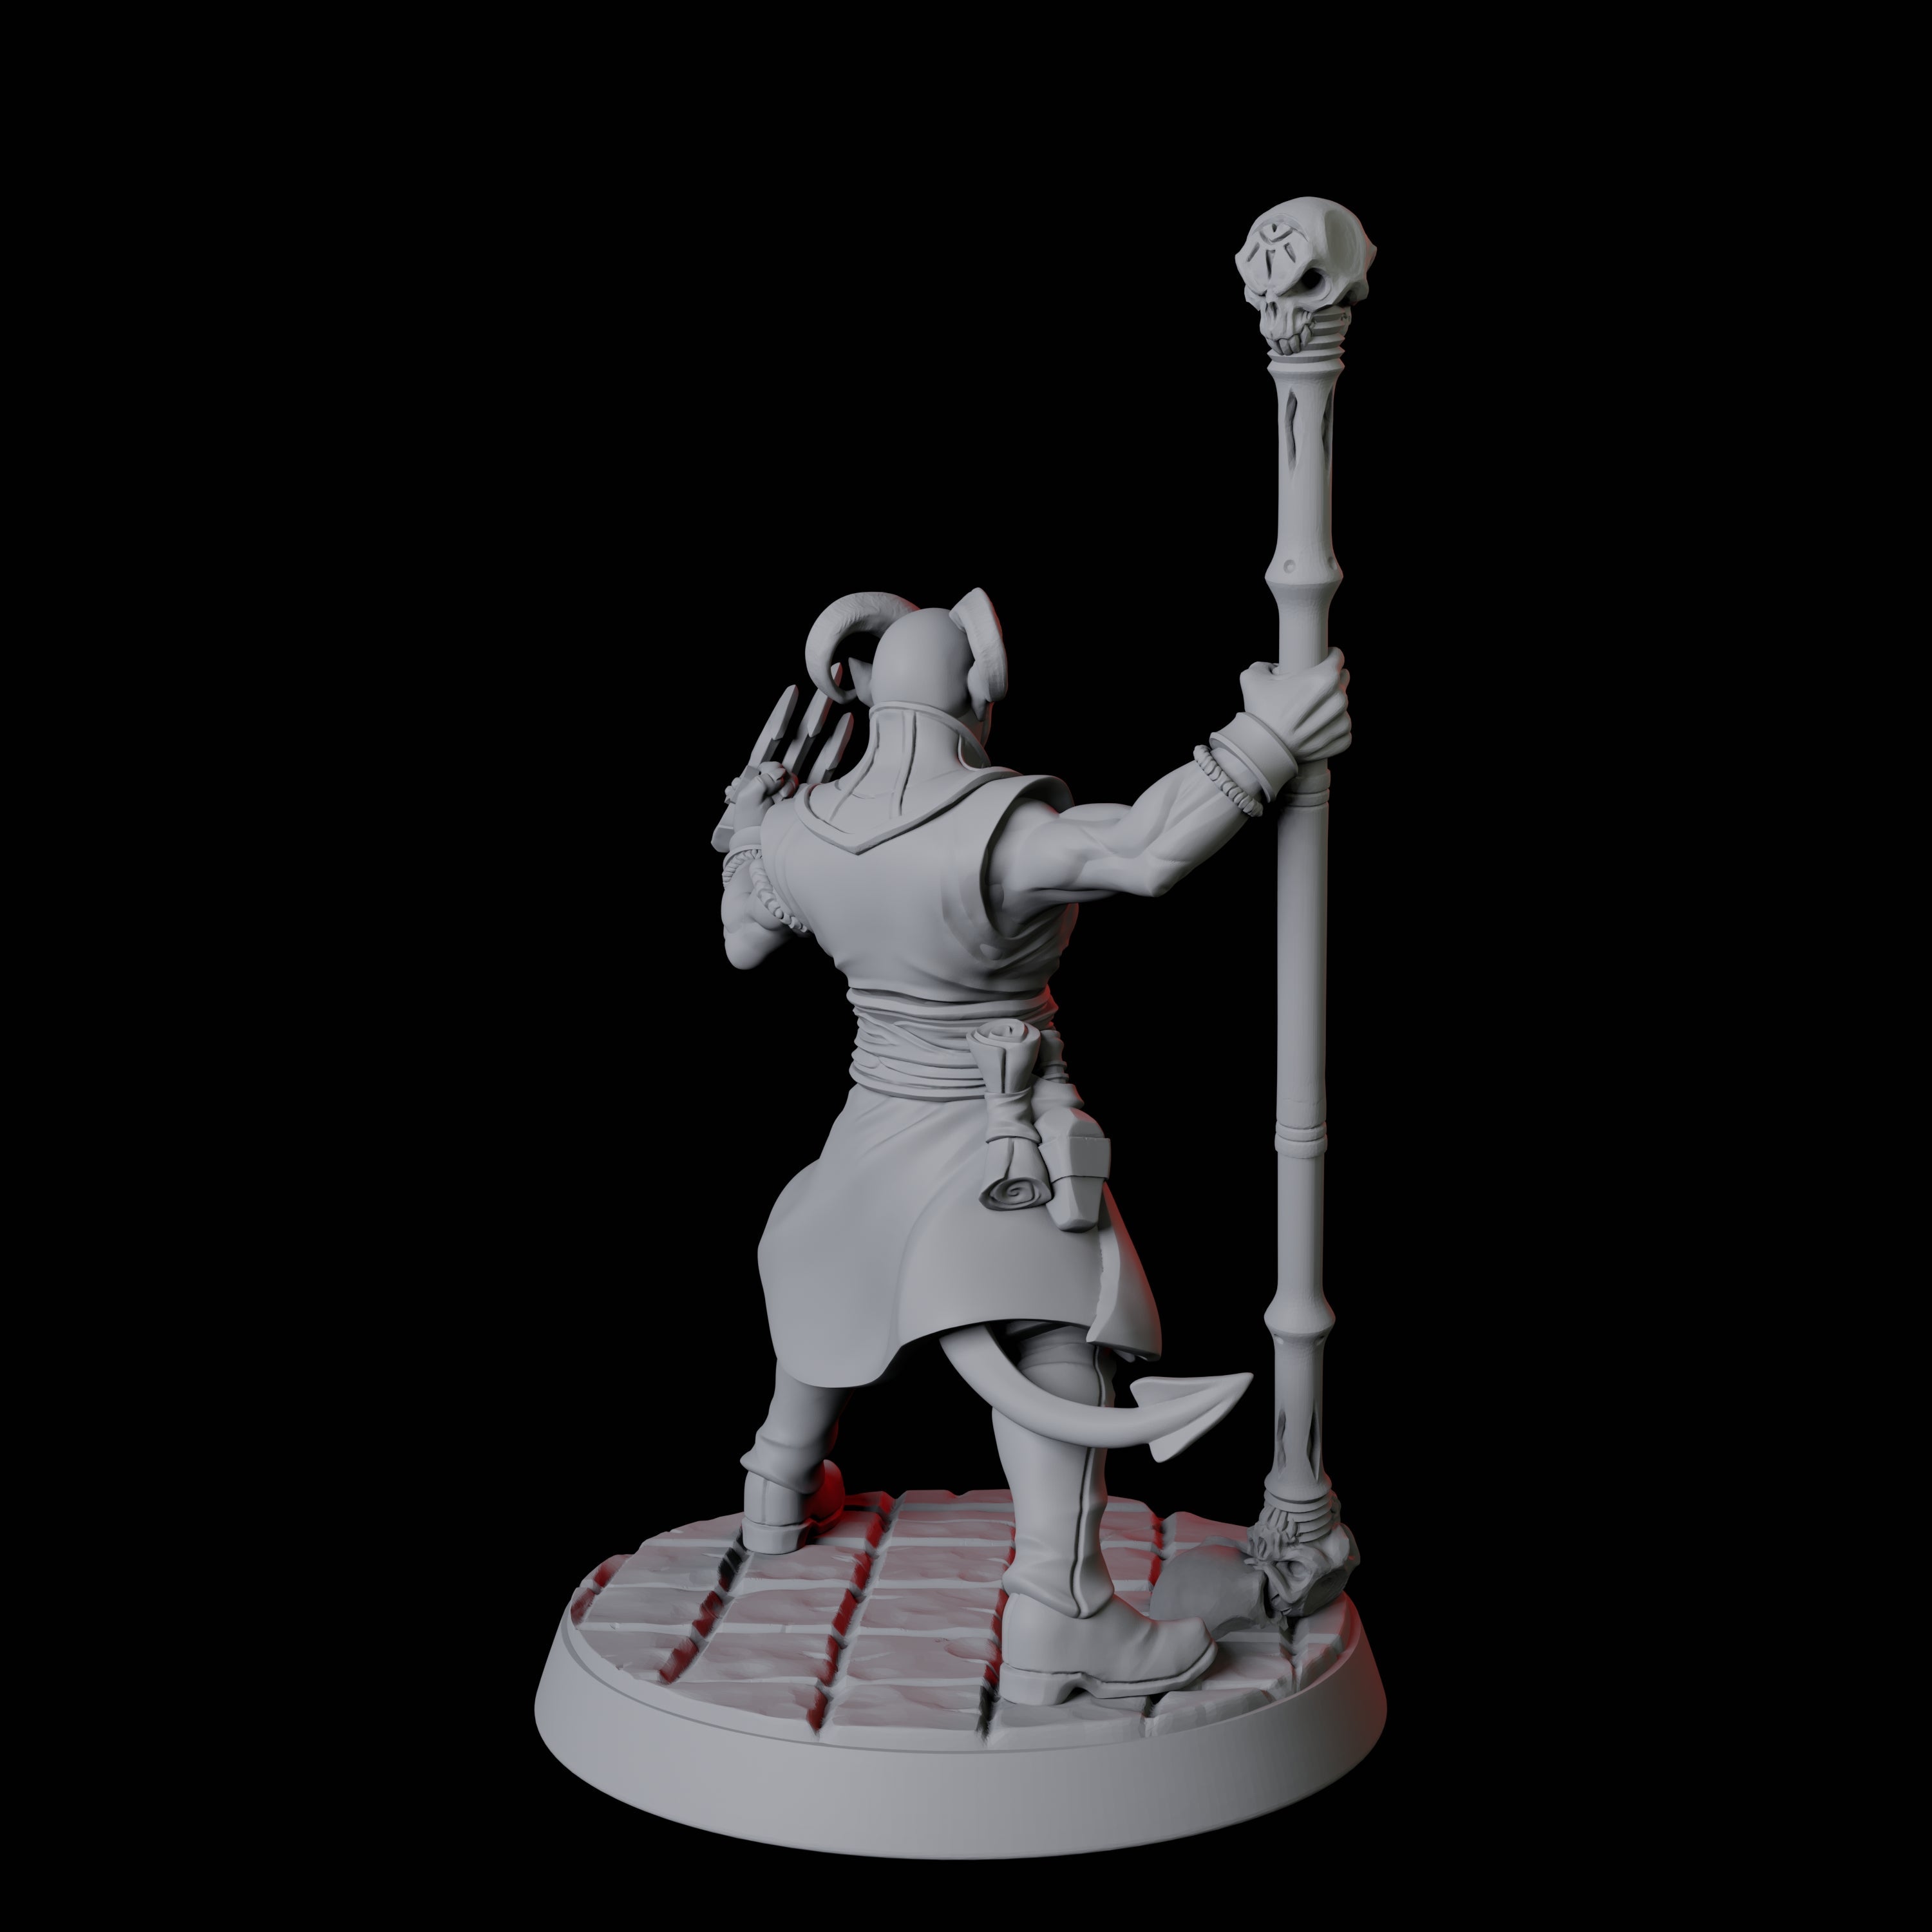 Tiefling Monk C Miniature for Dungeons and Dragons, Pathfinder or other TTRPGs